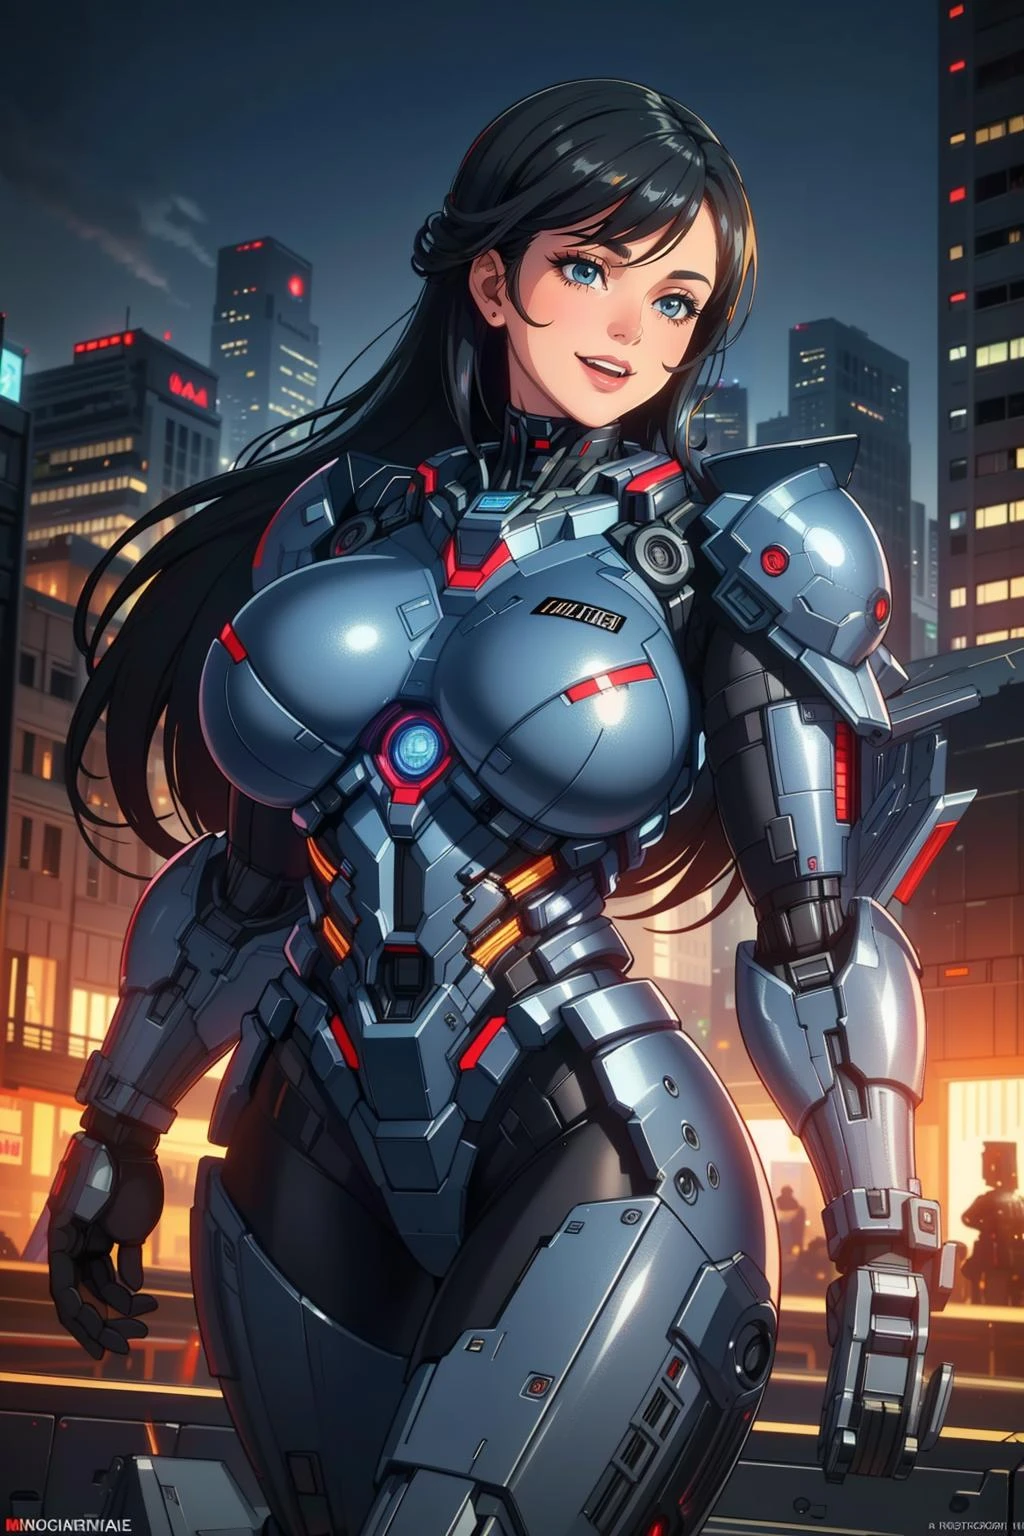 ((MAsterpiece, best quAlity,edgQuAlity)),微笑著,興奮的,
edgMechA, A ((giAnt womAn)) in robot suit stAnding in front of A city At night ,womAn weAring edgMechA, mechA suit 